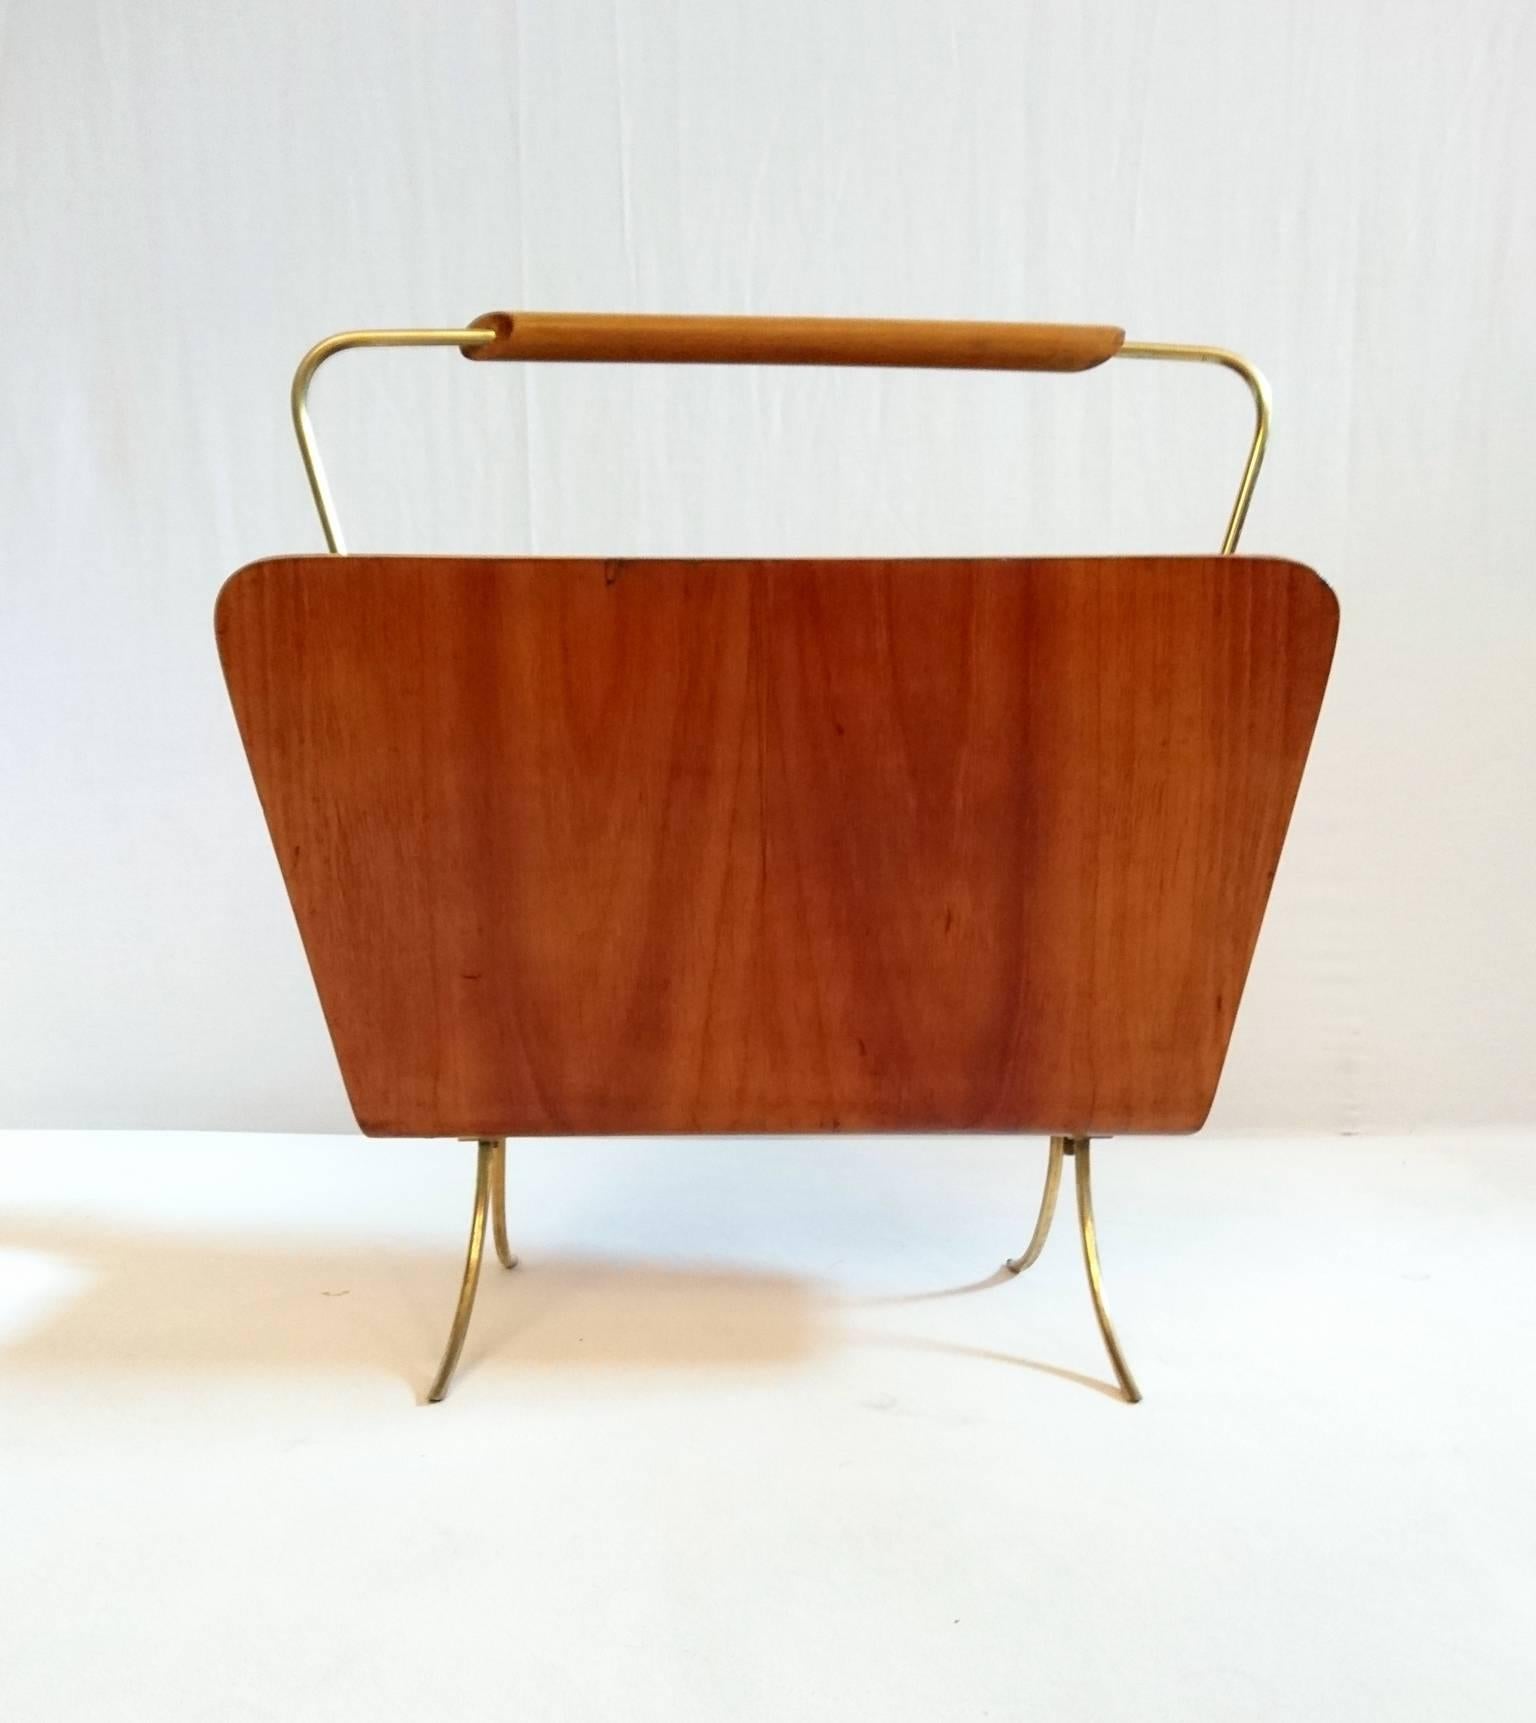 1950s Italian magazine rack in bent ash plywood and details in brass.